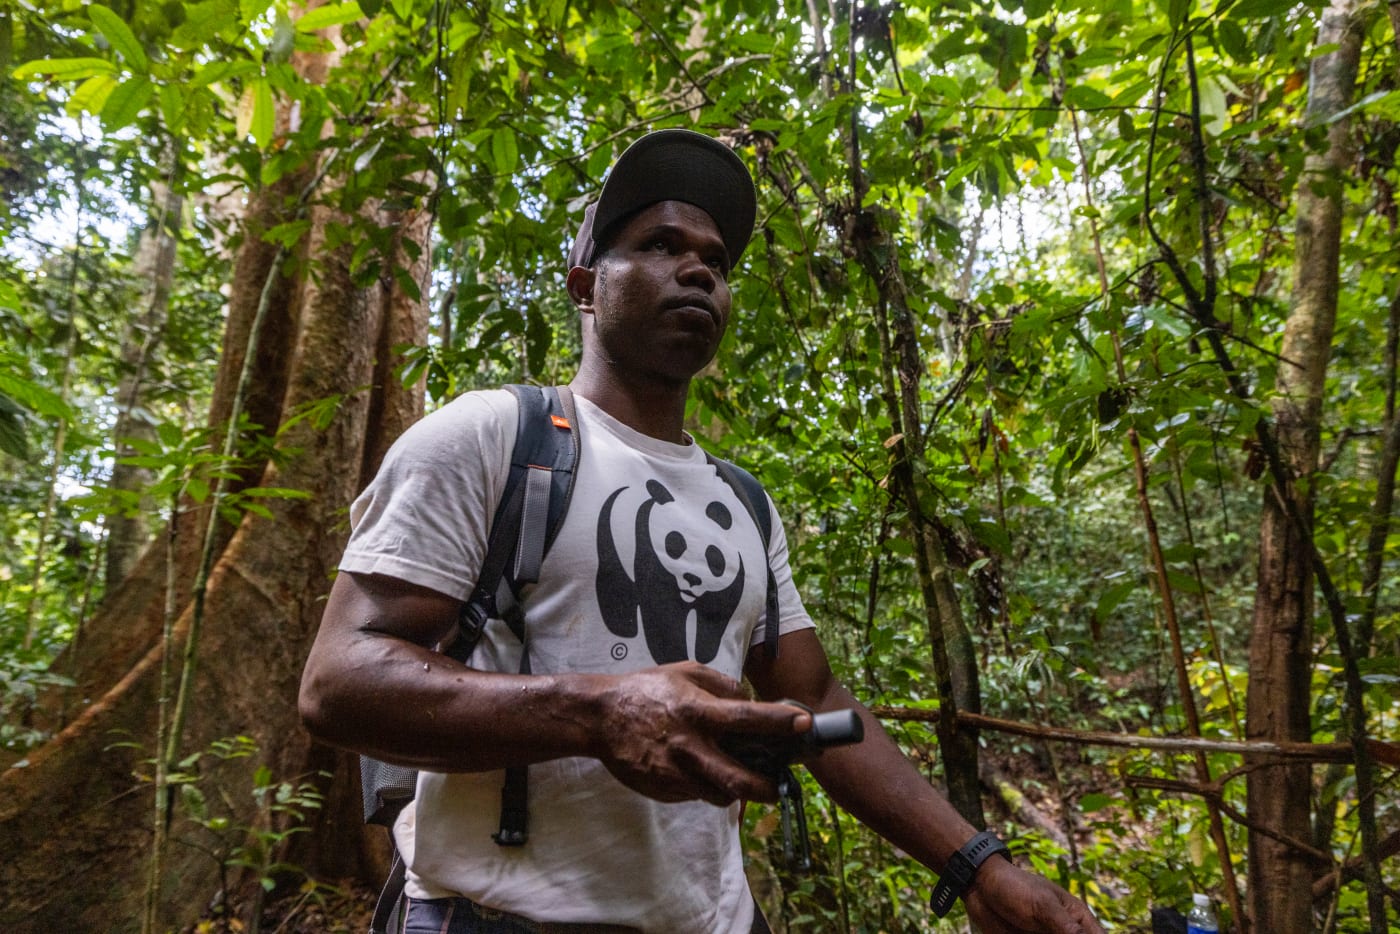 Merapi stands in a rainforest, holding a GPS device. He is wearing a cap and a WWF t-shirt.